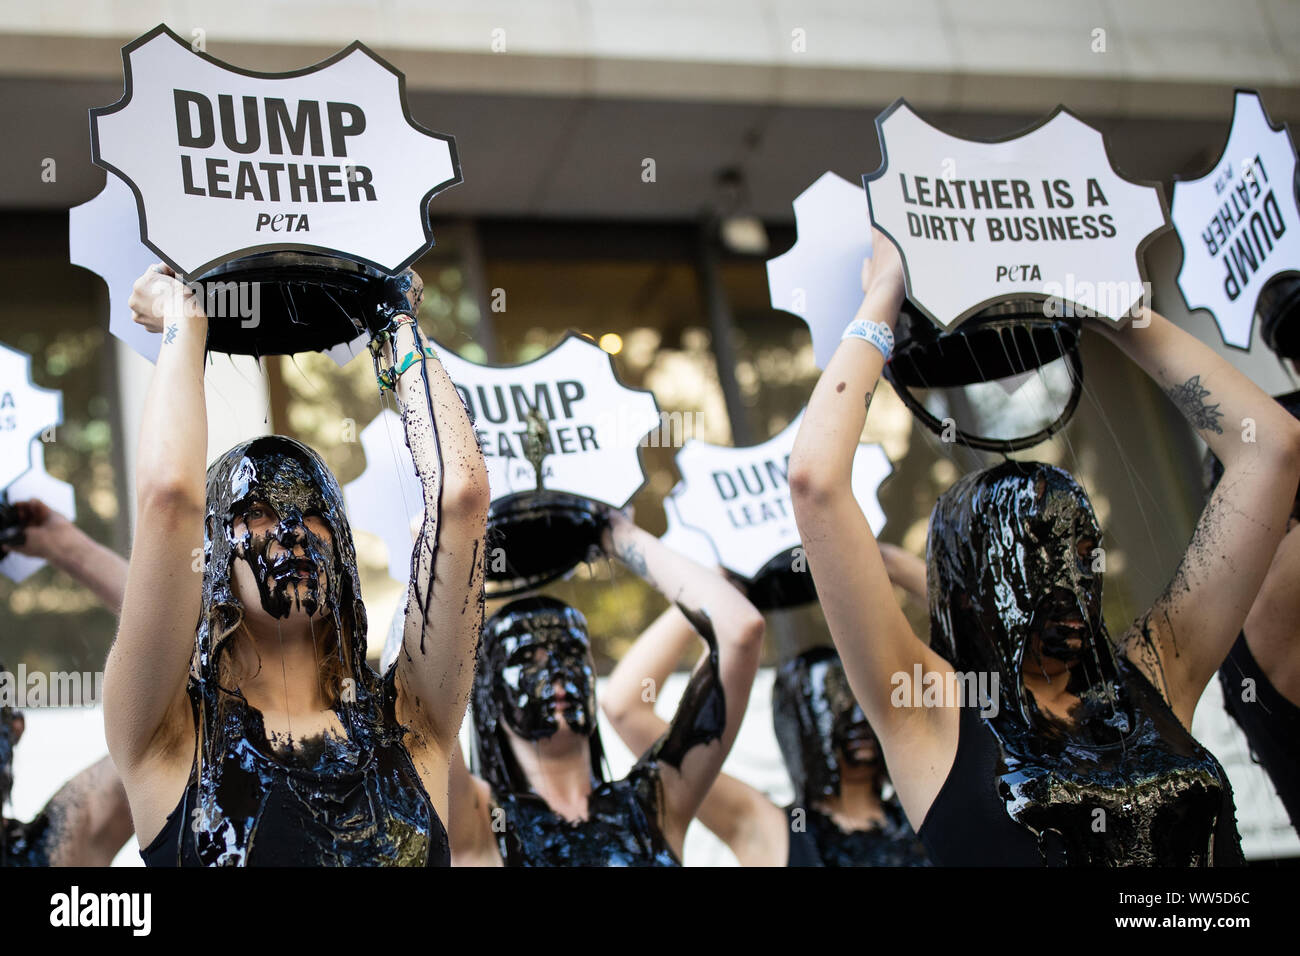 Activists from PETA stage a demonstration outside the Spring/Summer2020 London Fashion Week at BFC Show Space Show, The Strand, London. Stock Photo